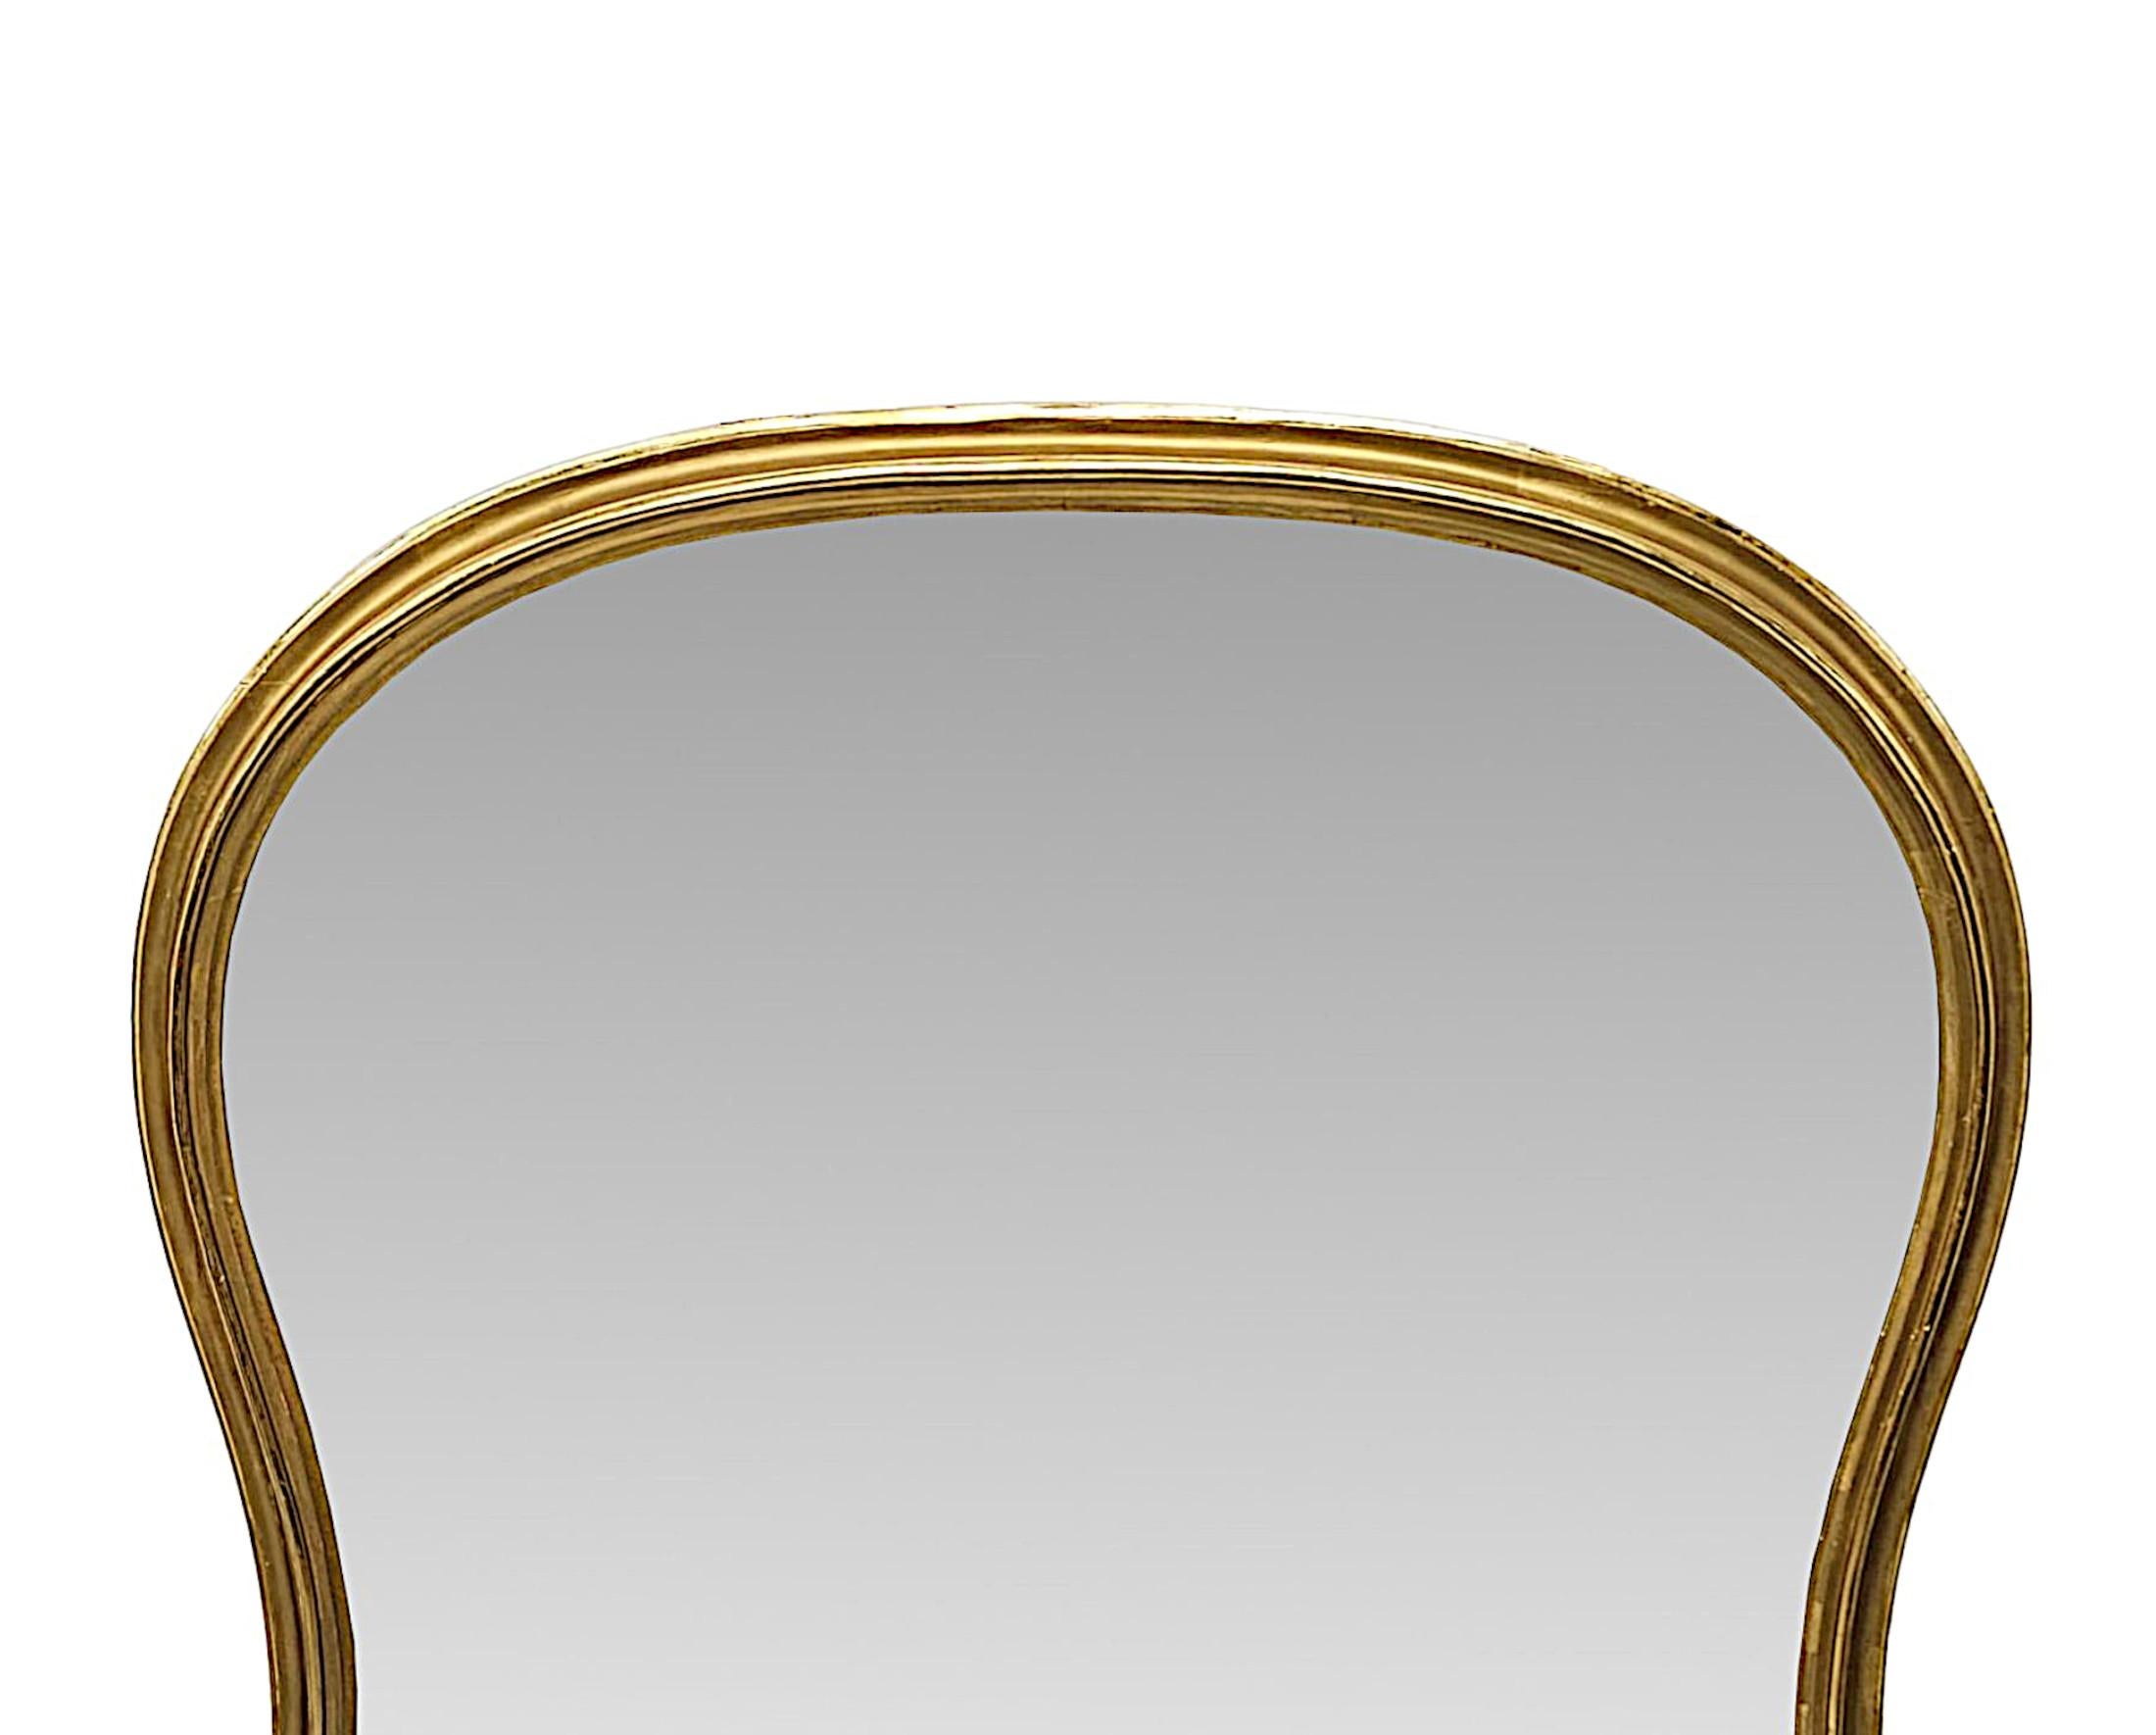 A very fine 19th Century waisted archtop giltwood overmantel mirror, of large proportions and exceptional quality.  The shaped mirror glass plate is set within an elegantly simple and stunningly hand carved, moulded, fluted and pierced giltwood